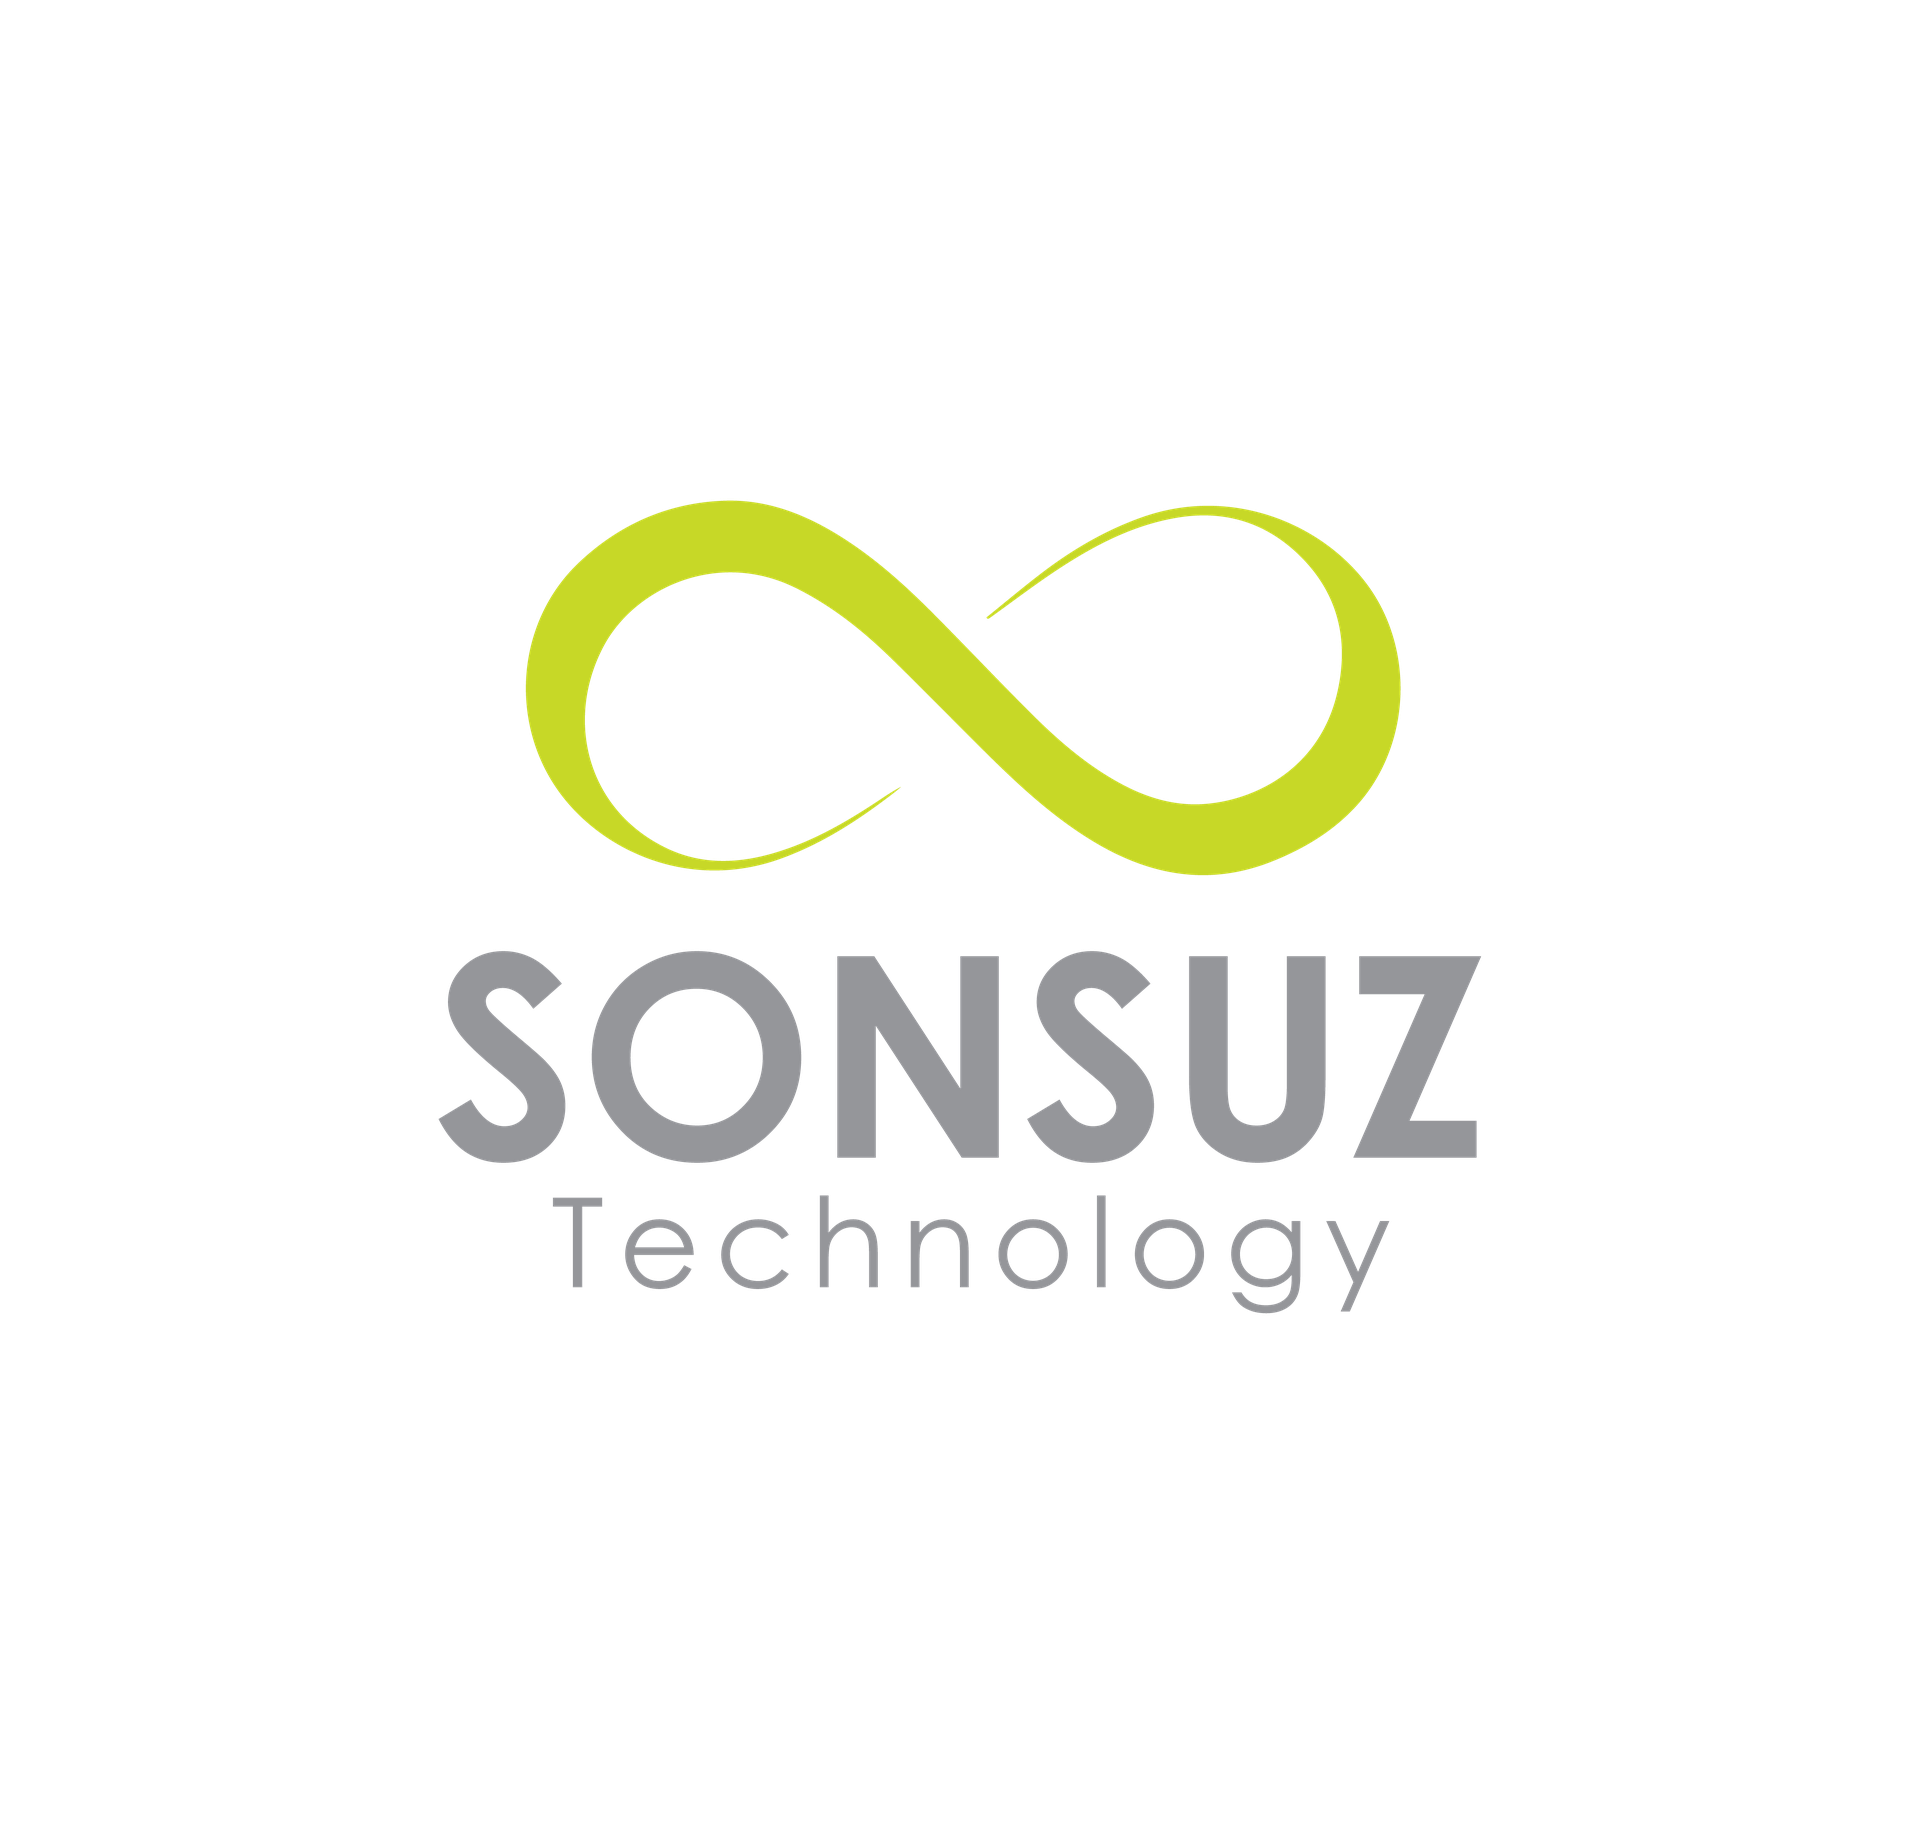 Infinitrs (Private) Limited, Sonsuz Technology